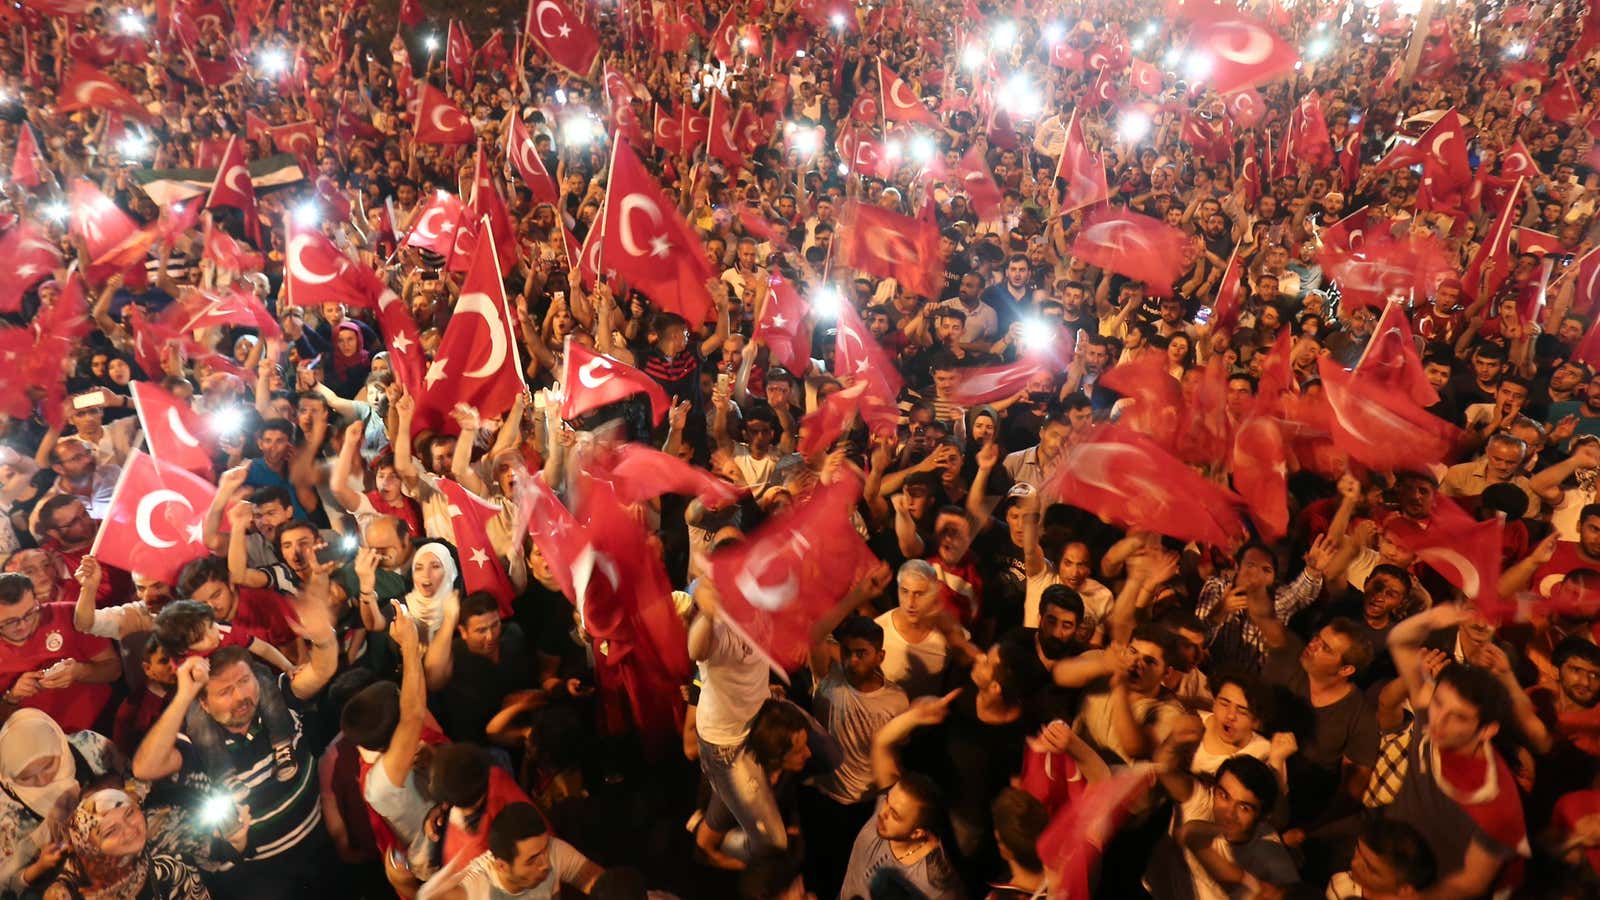 Following a social media blackout, people gather on Taksim Square in Istanbul, Turkey.